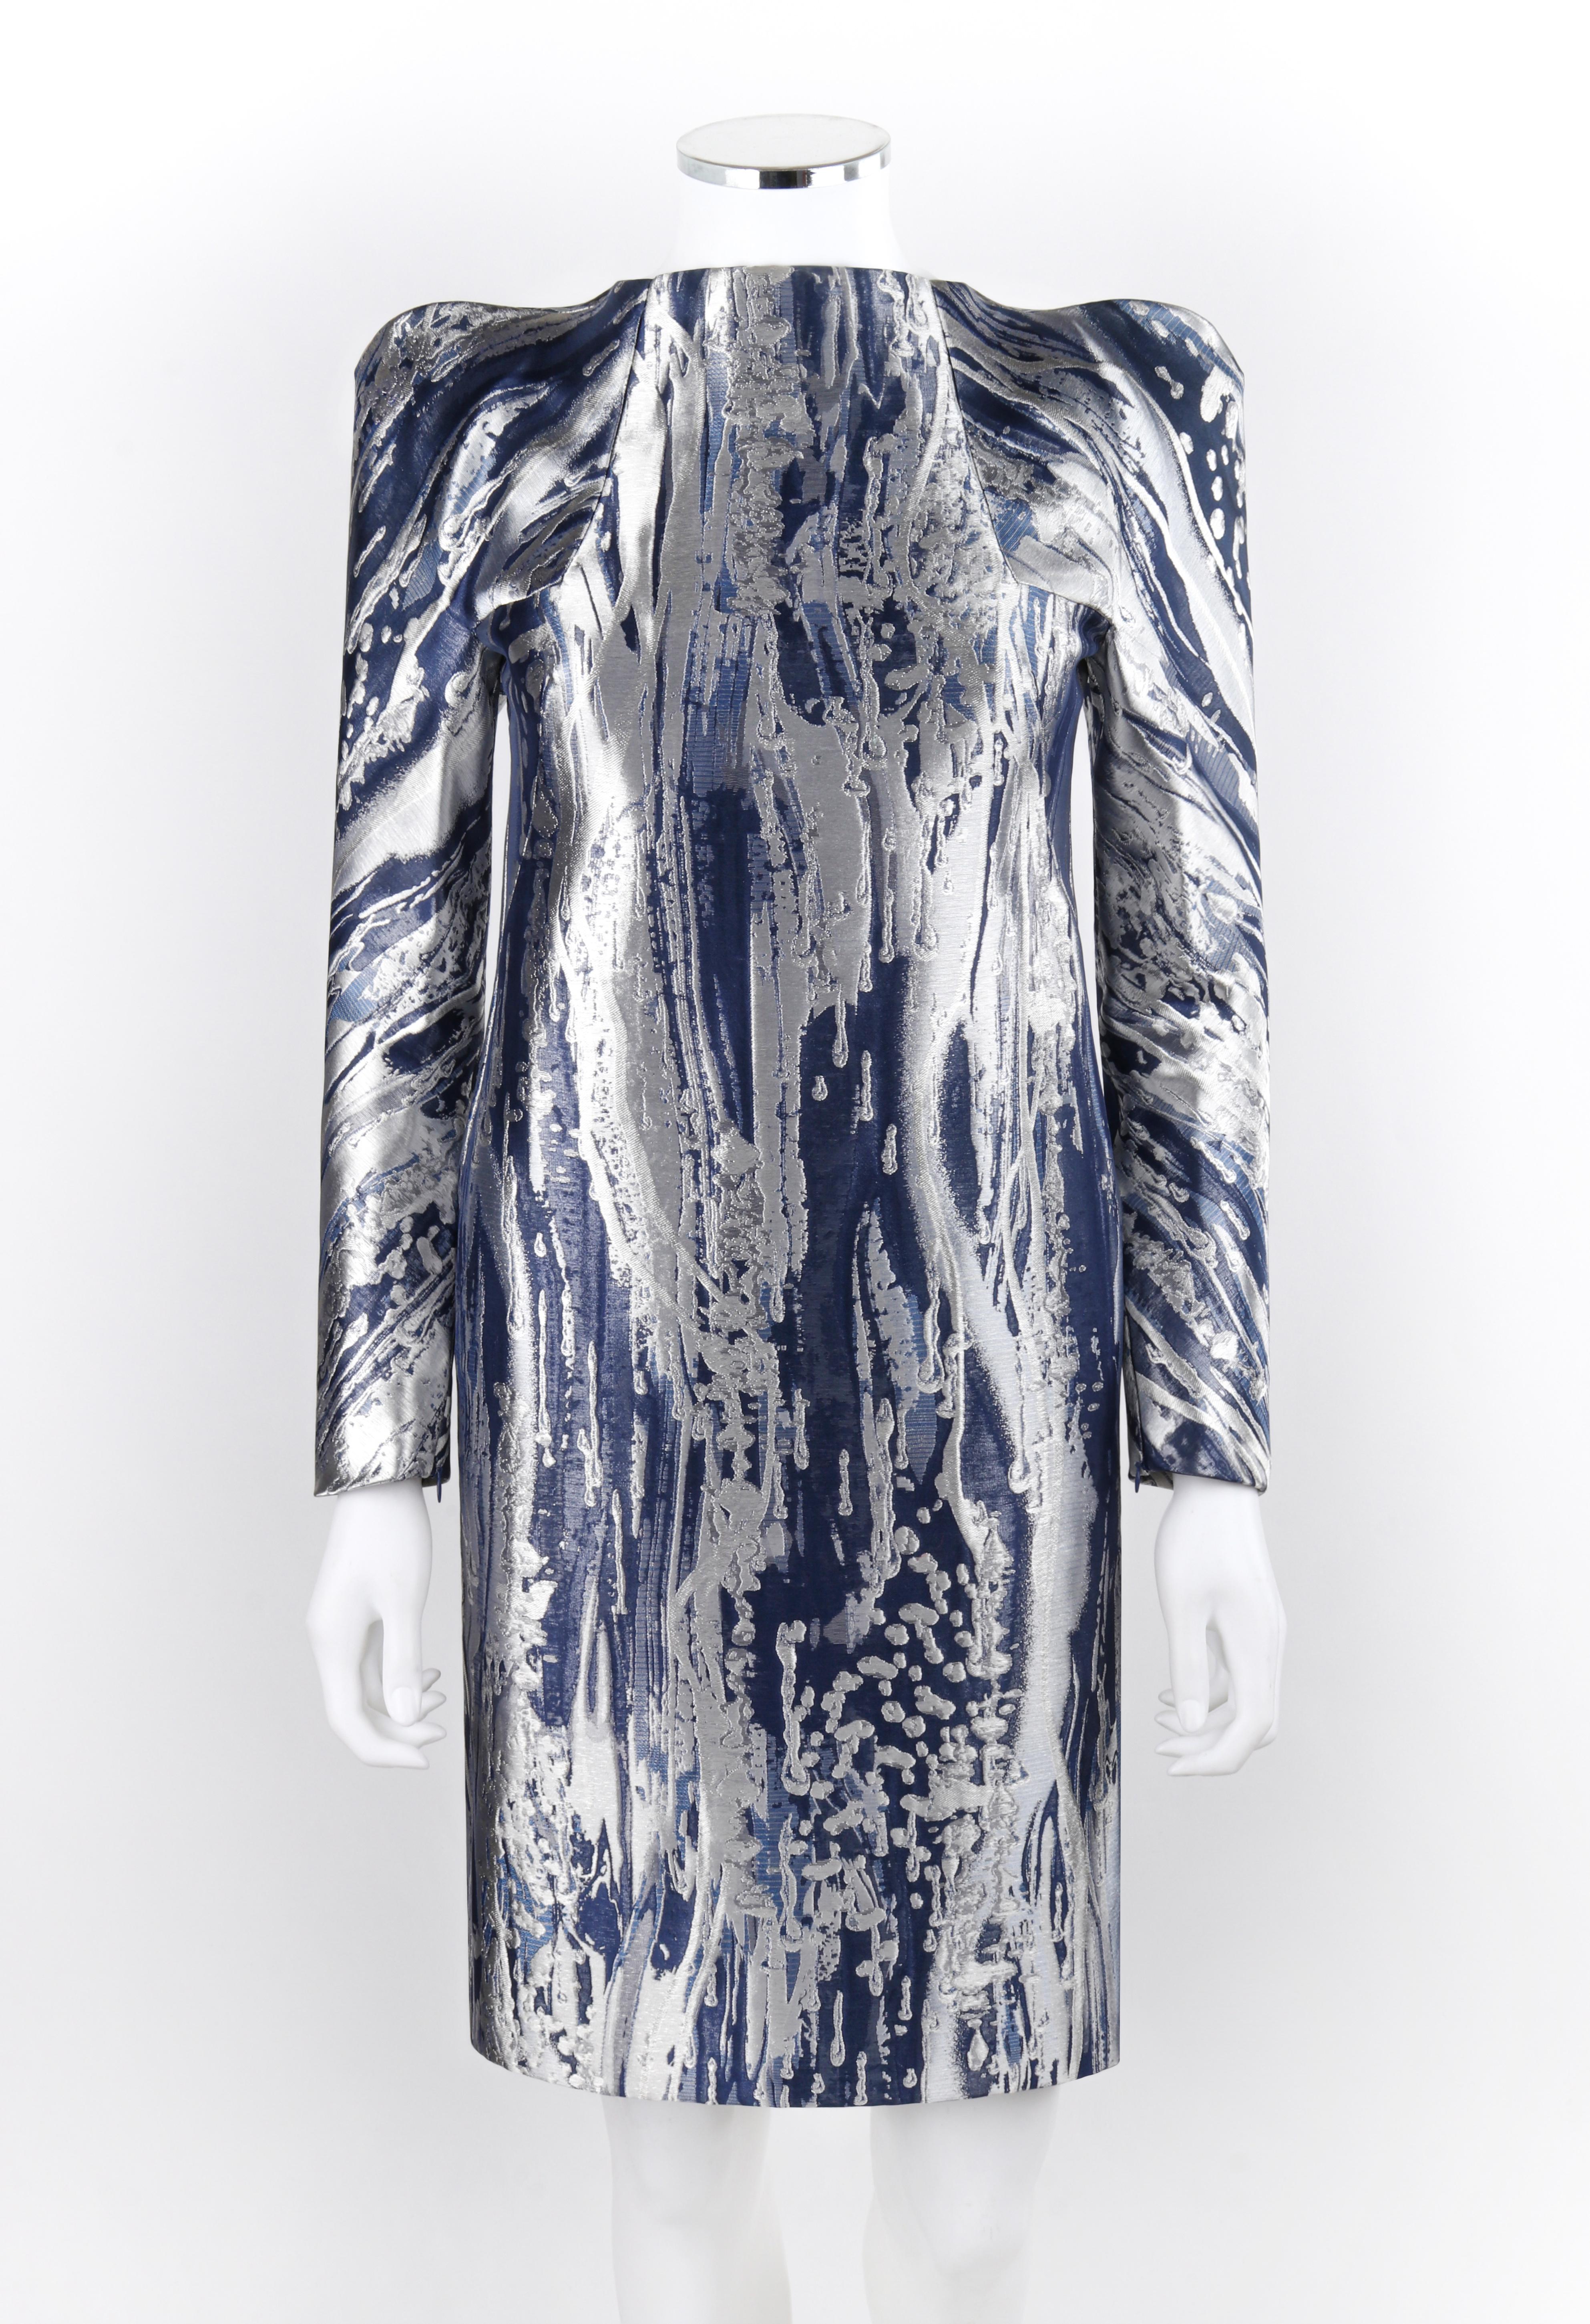 ALEXANDER McQUEEN Resort 2010 Blue Silver Metallic Structured Shift Dress NWT
 
Brand / Manufacturer: Alexander McQueen
Collection: Resort 2010
Designer: Alexander McQueen
Style: Shift dress
Color(s): Shades of silver, blue
Lined: Yes
Unmarked